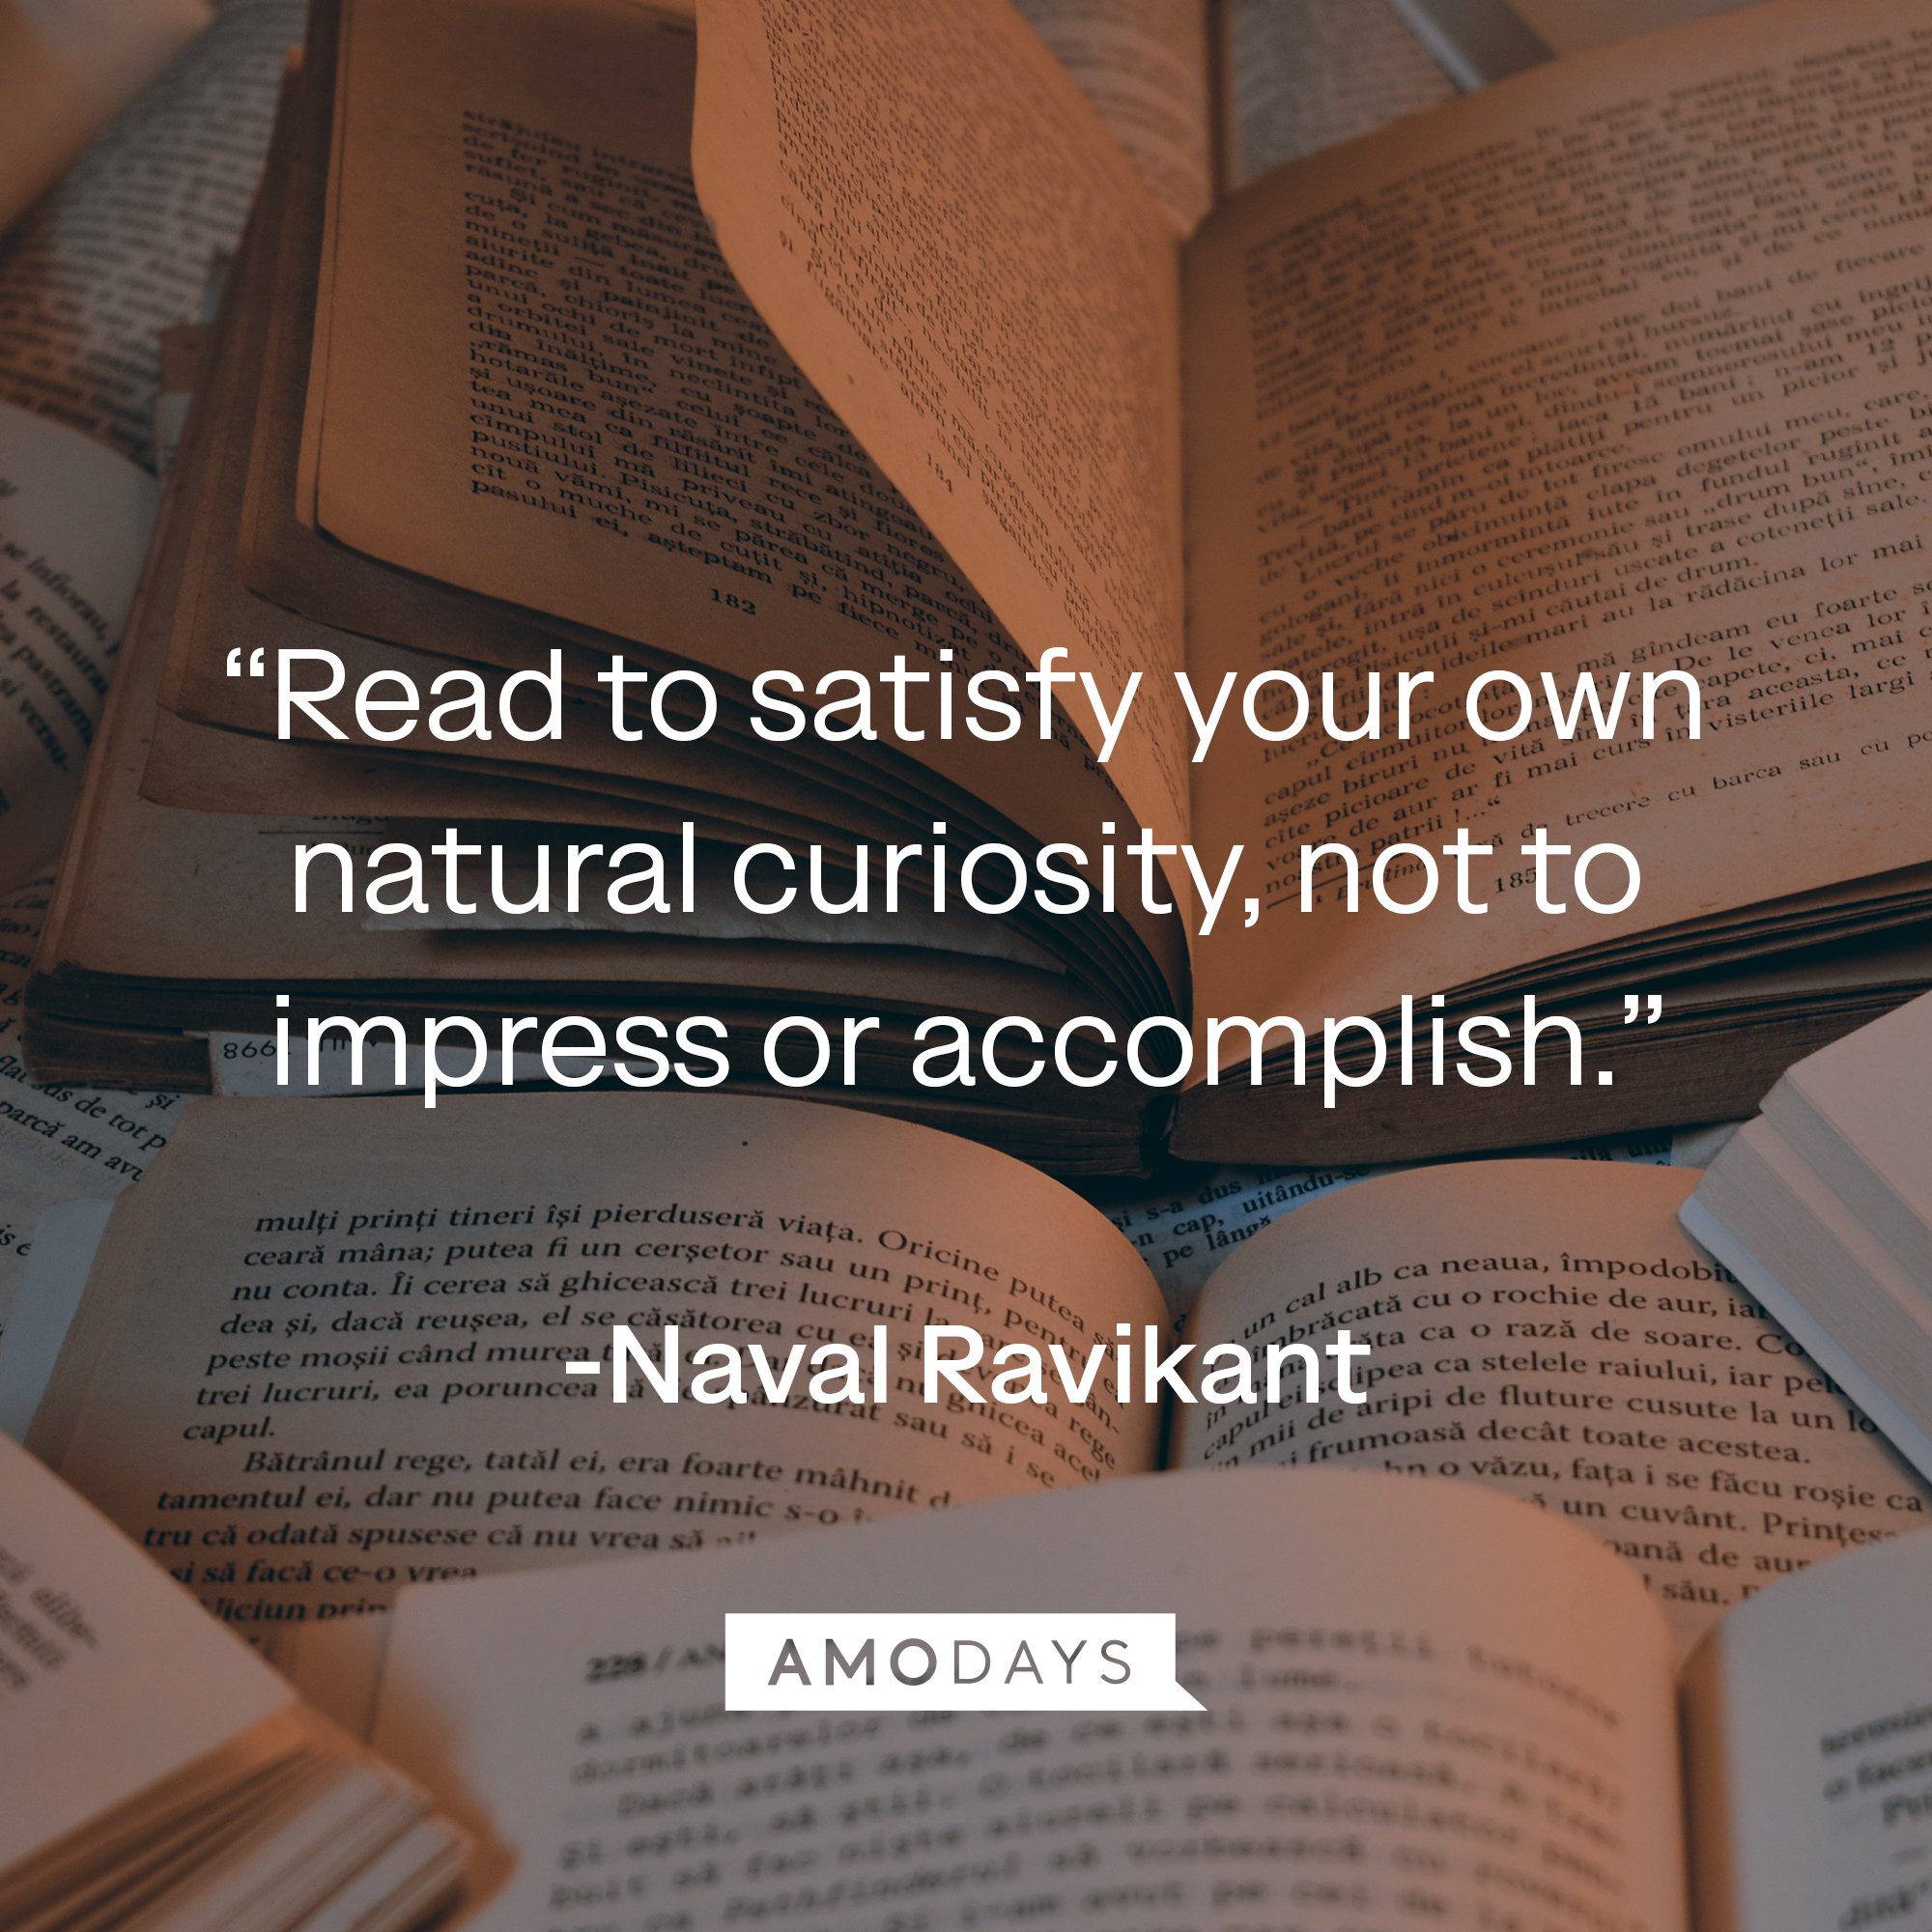 Naval Ravikant's quote: “Read to satisfy your own natural curiosity, not to impress or accomplish.” | Image: AmoDays